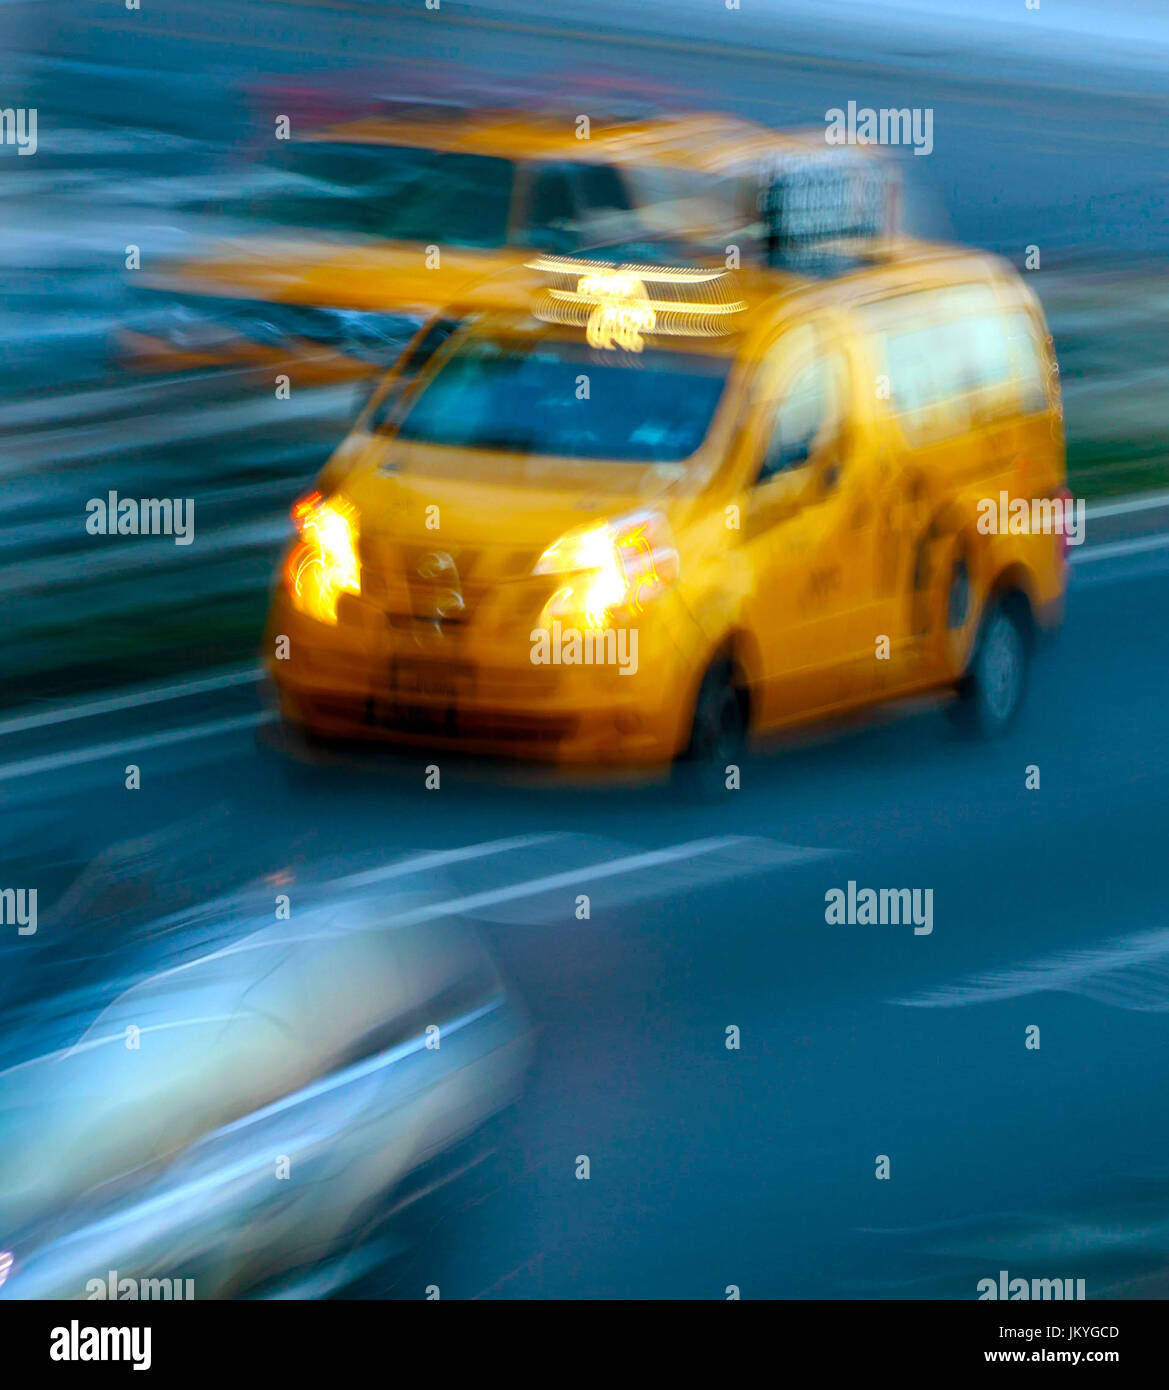 New York City taxi cab on highway Stock Photo